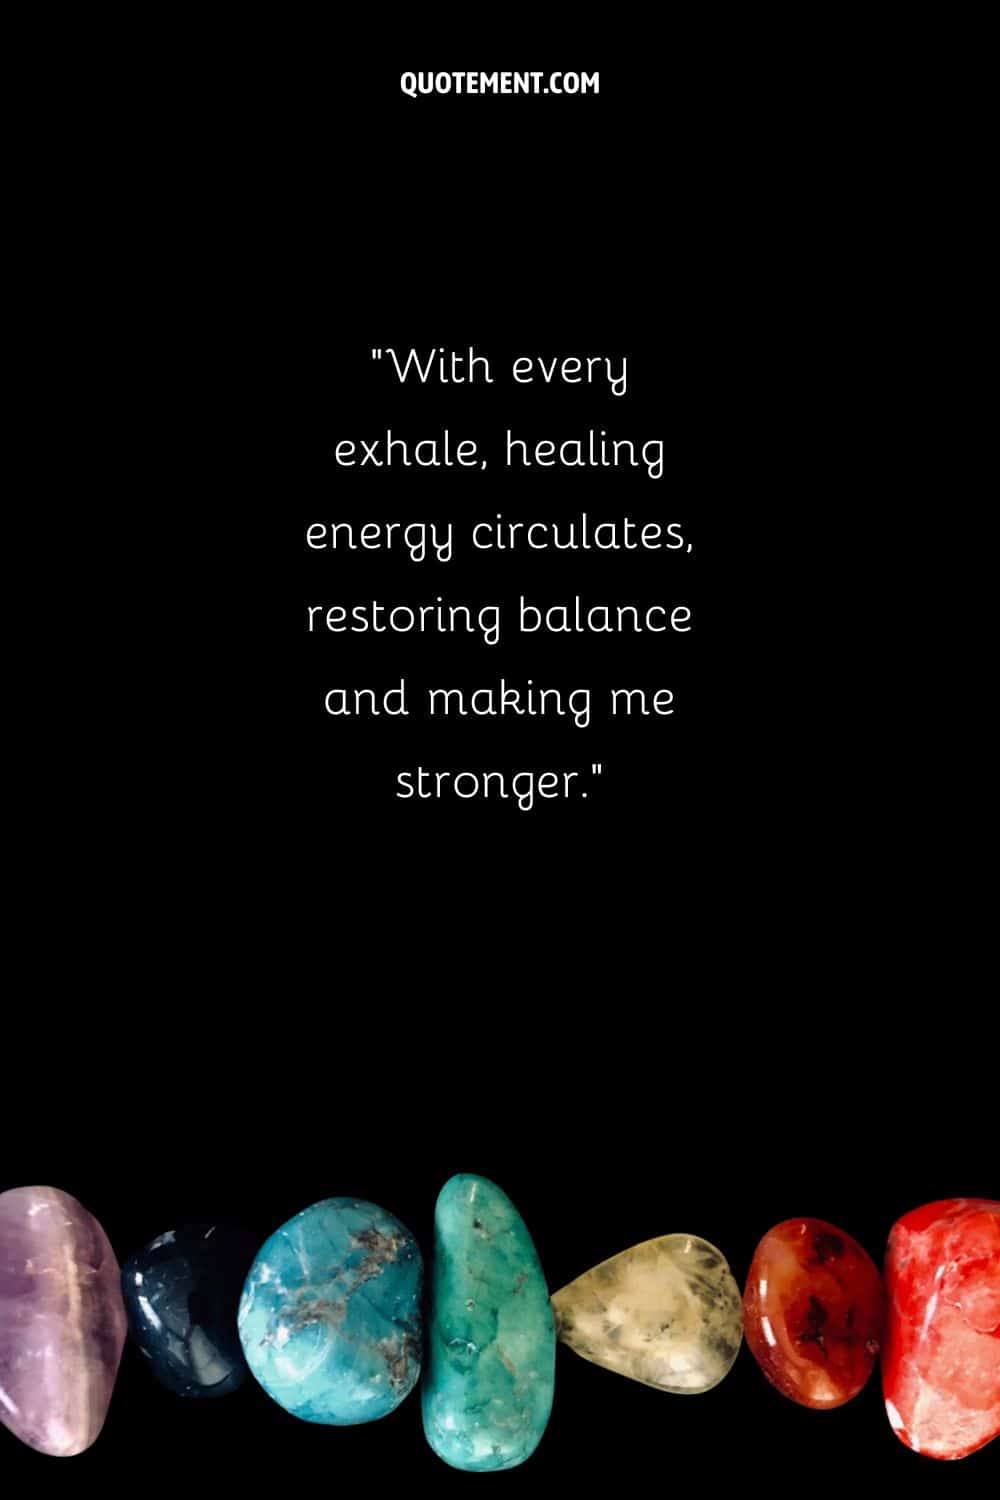 Example of a healing affirmation for root chakra represented by the chakra stones under
